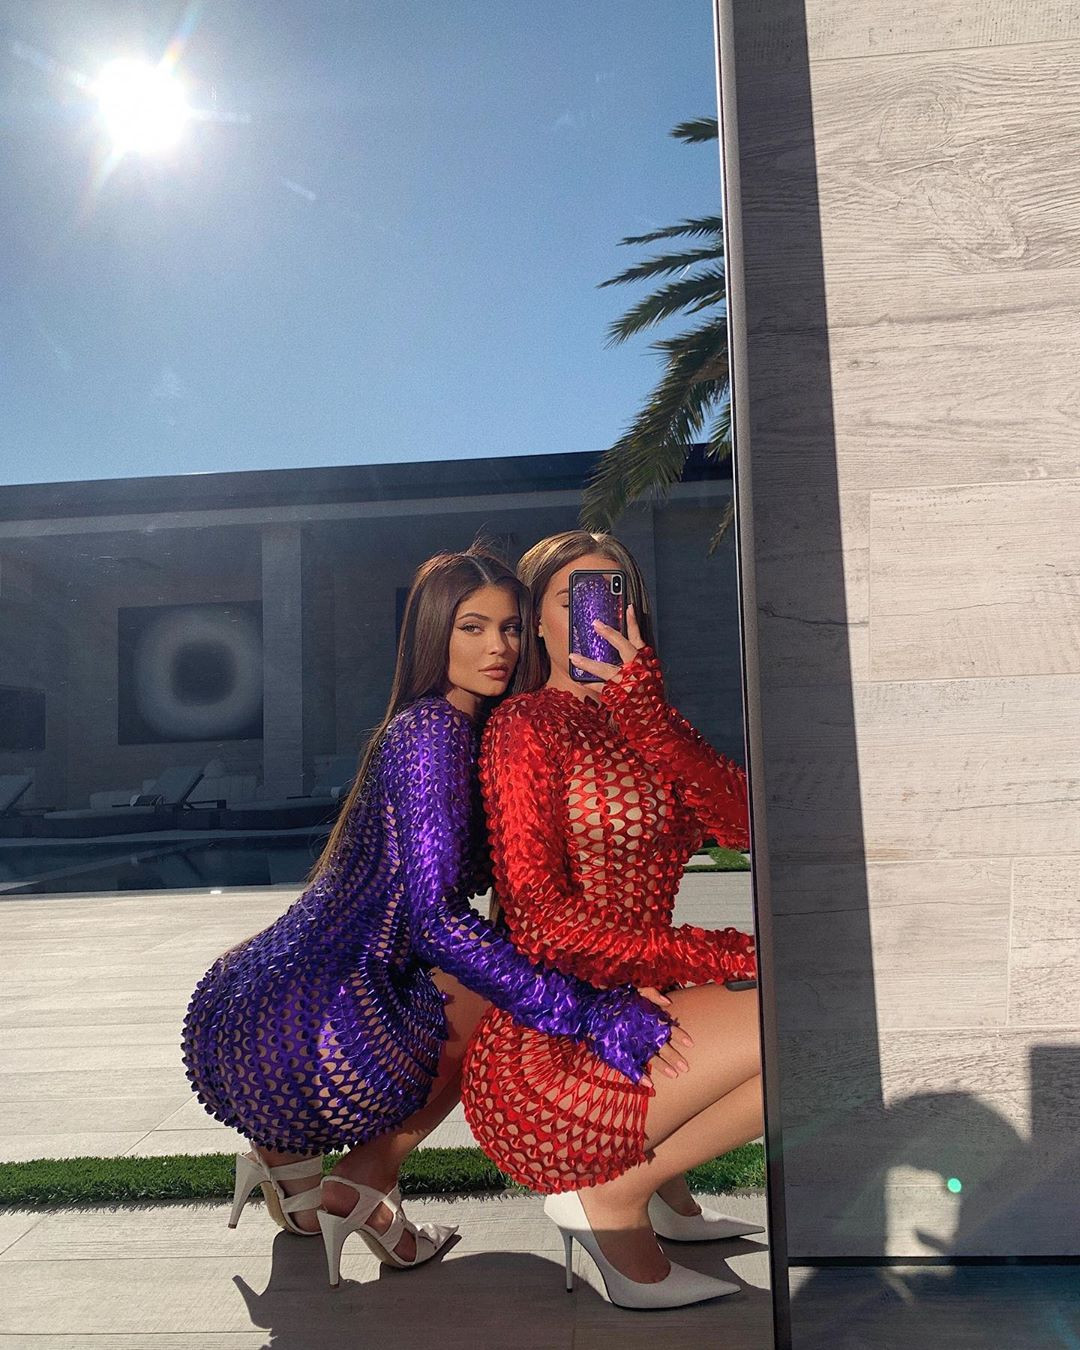 Kylie Jenner And Bff Stassie Karanikolaous Many Matching Outfit Moments 